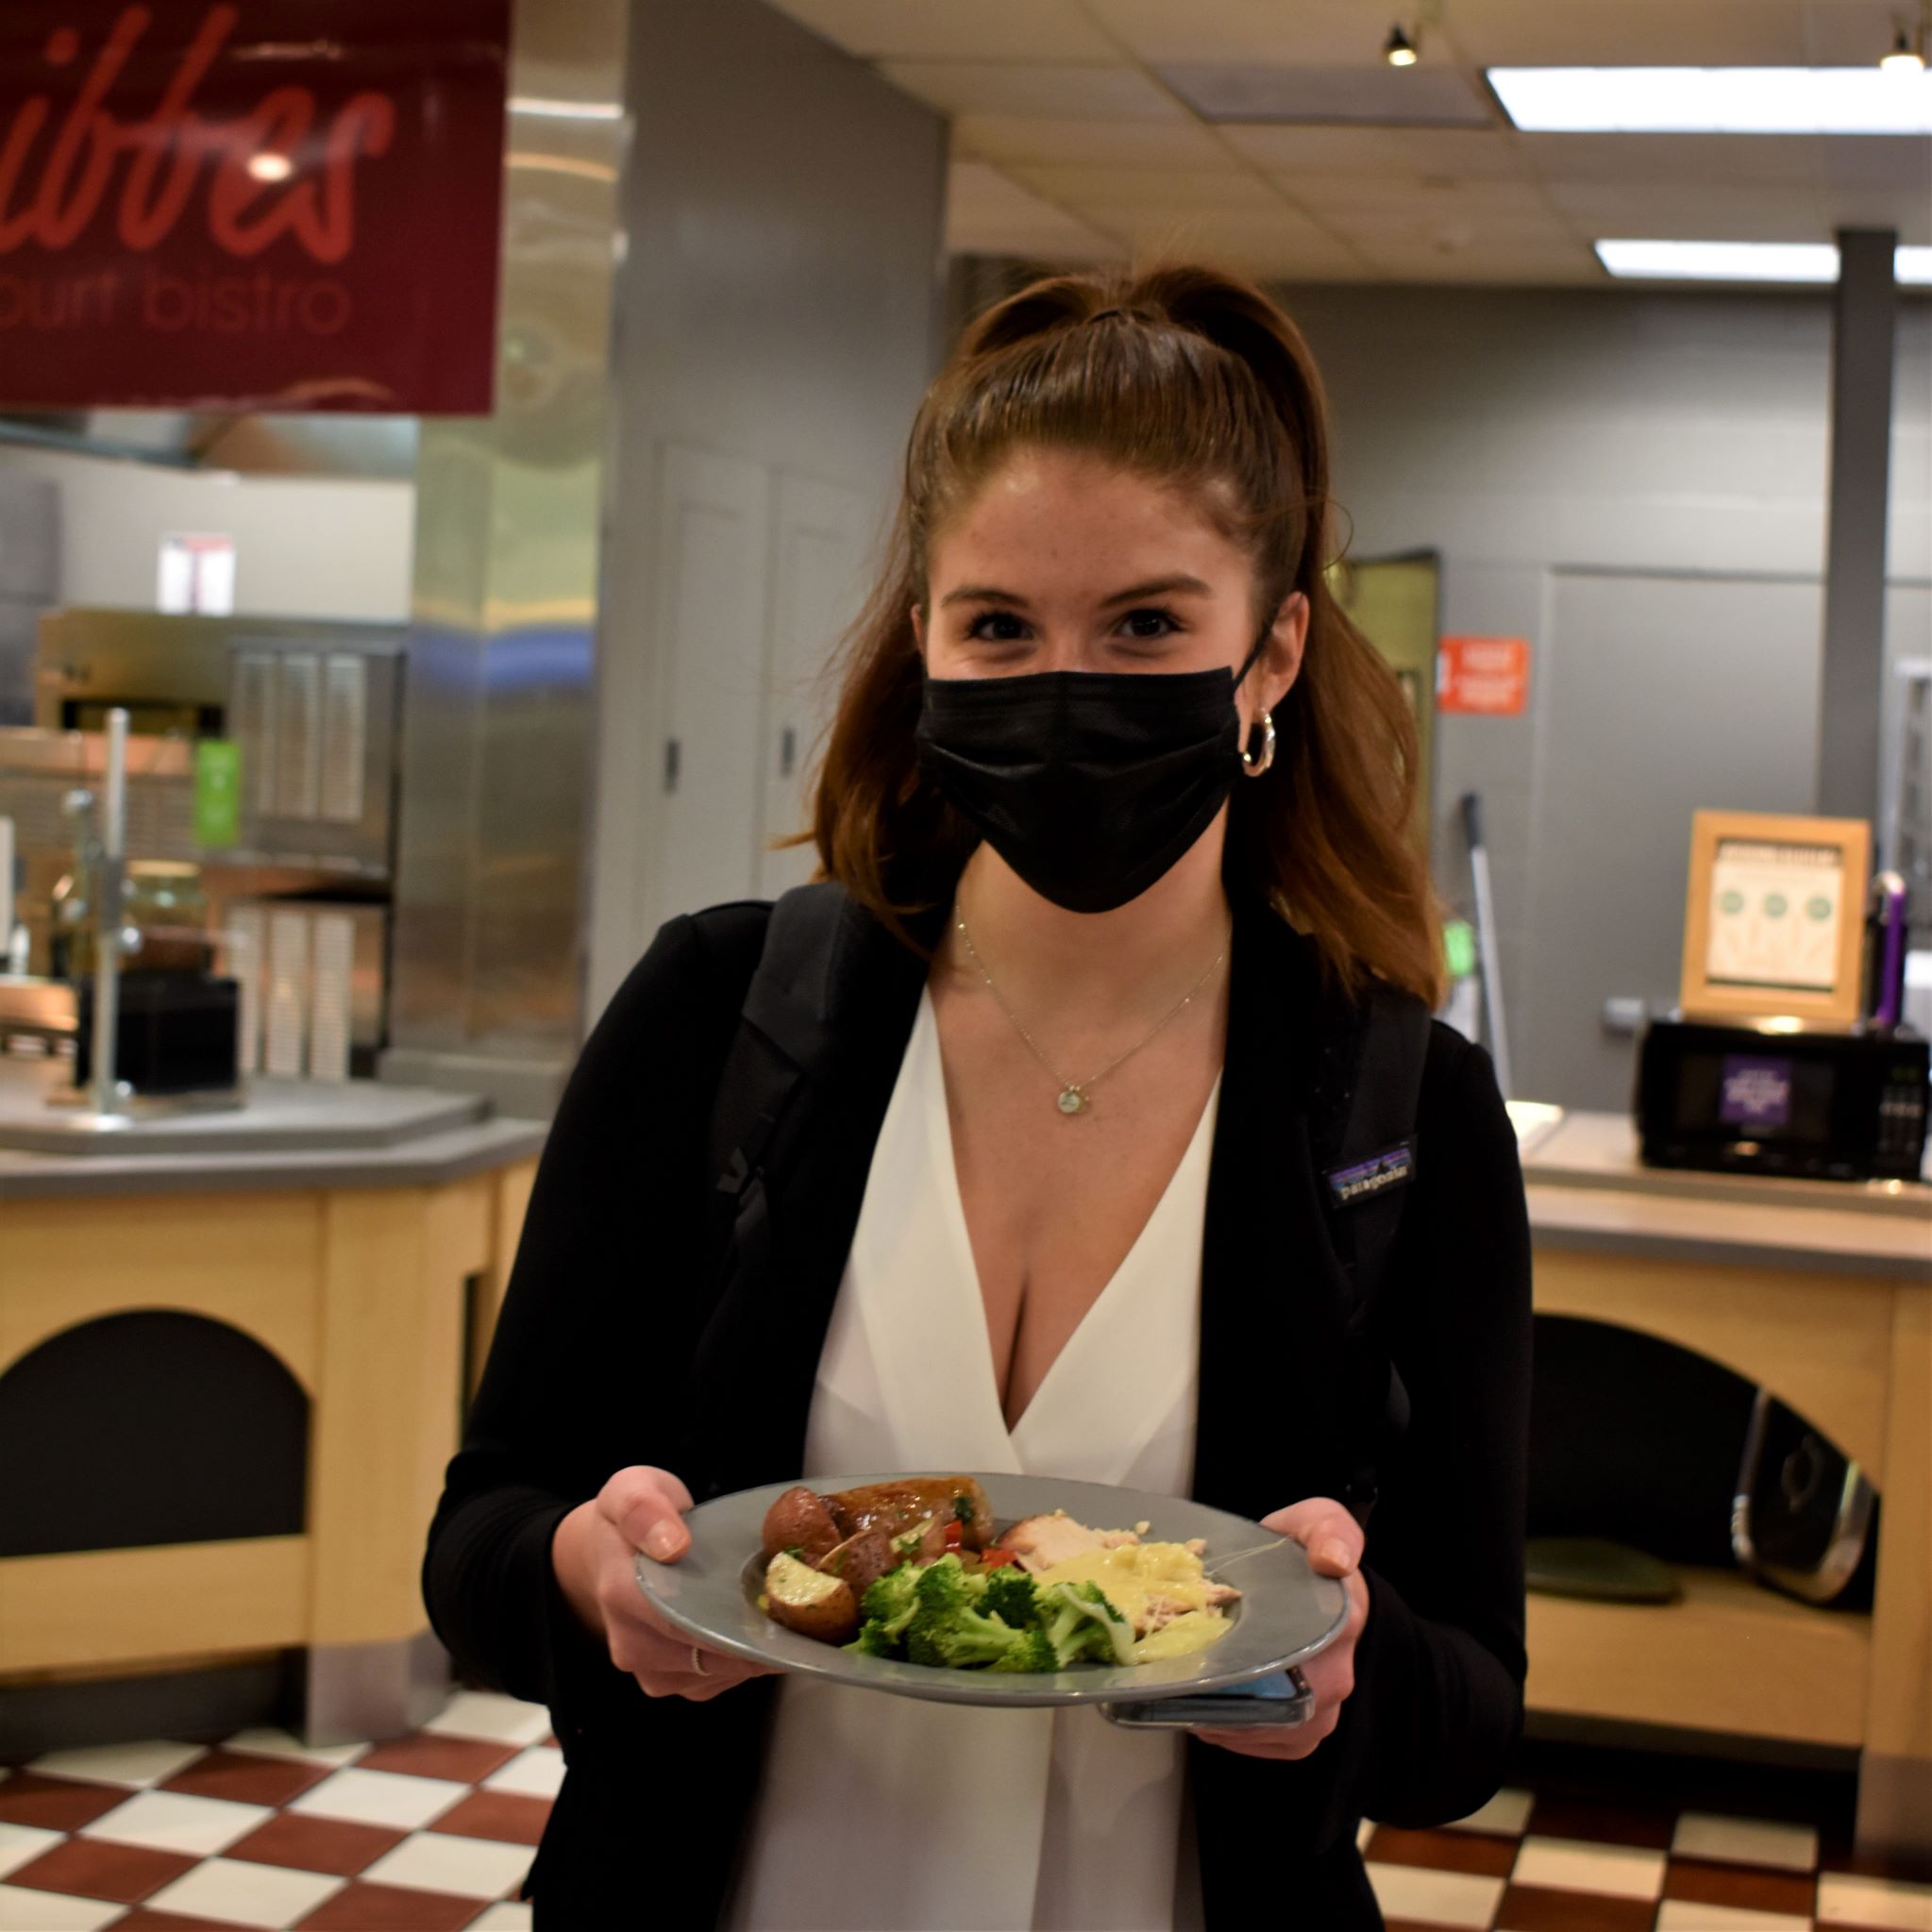 Student with plate in dining hall